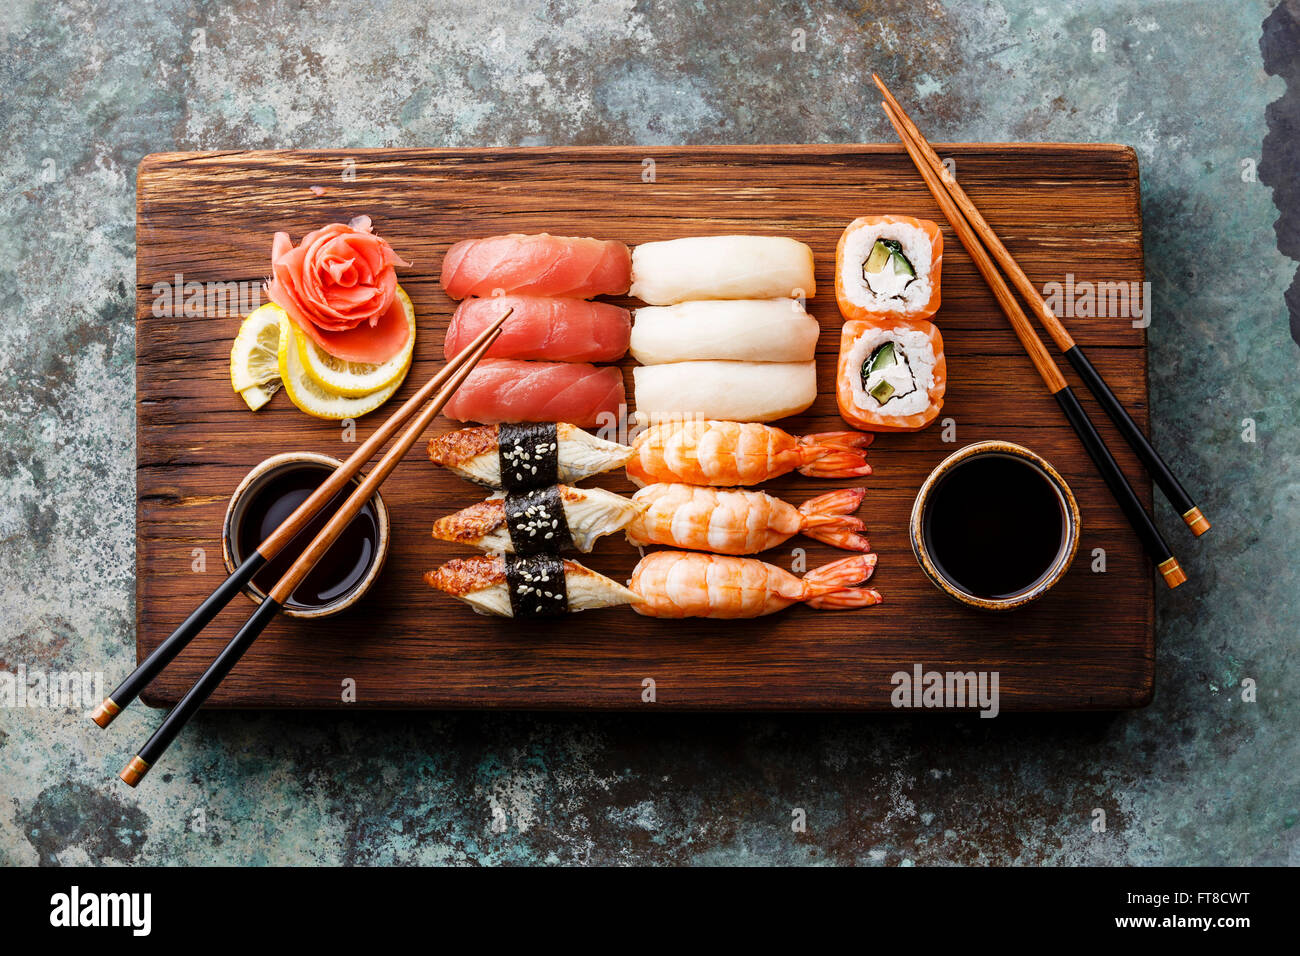 Sushi Set nigiri and sushi rolls served for two on wooden serving board block Stock Photo